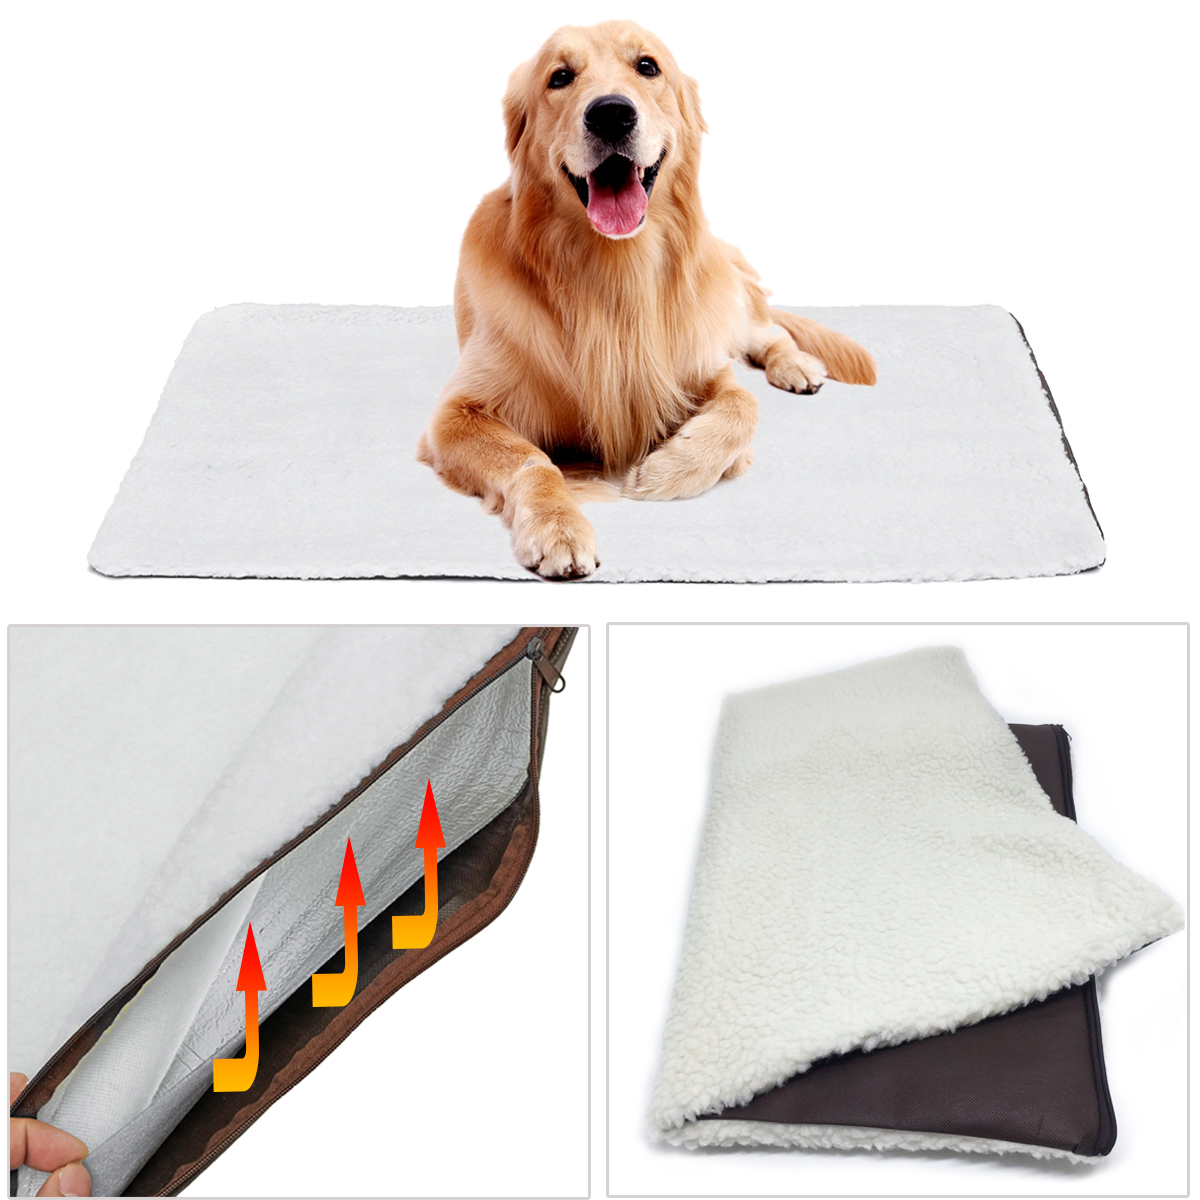 Large-Self-Heating-Dog-Bed-Fleece-Mat-Soft-Warm-Pet-Cat-Rug-Thermal-Washable-Pad-1567815-3